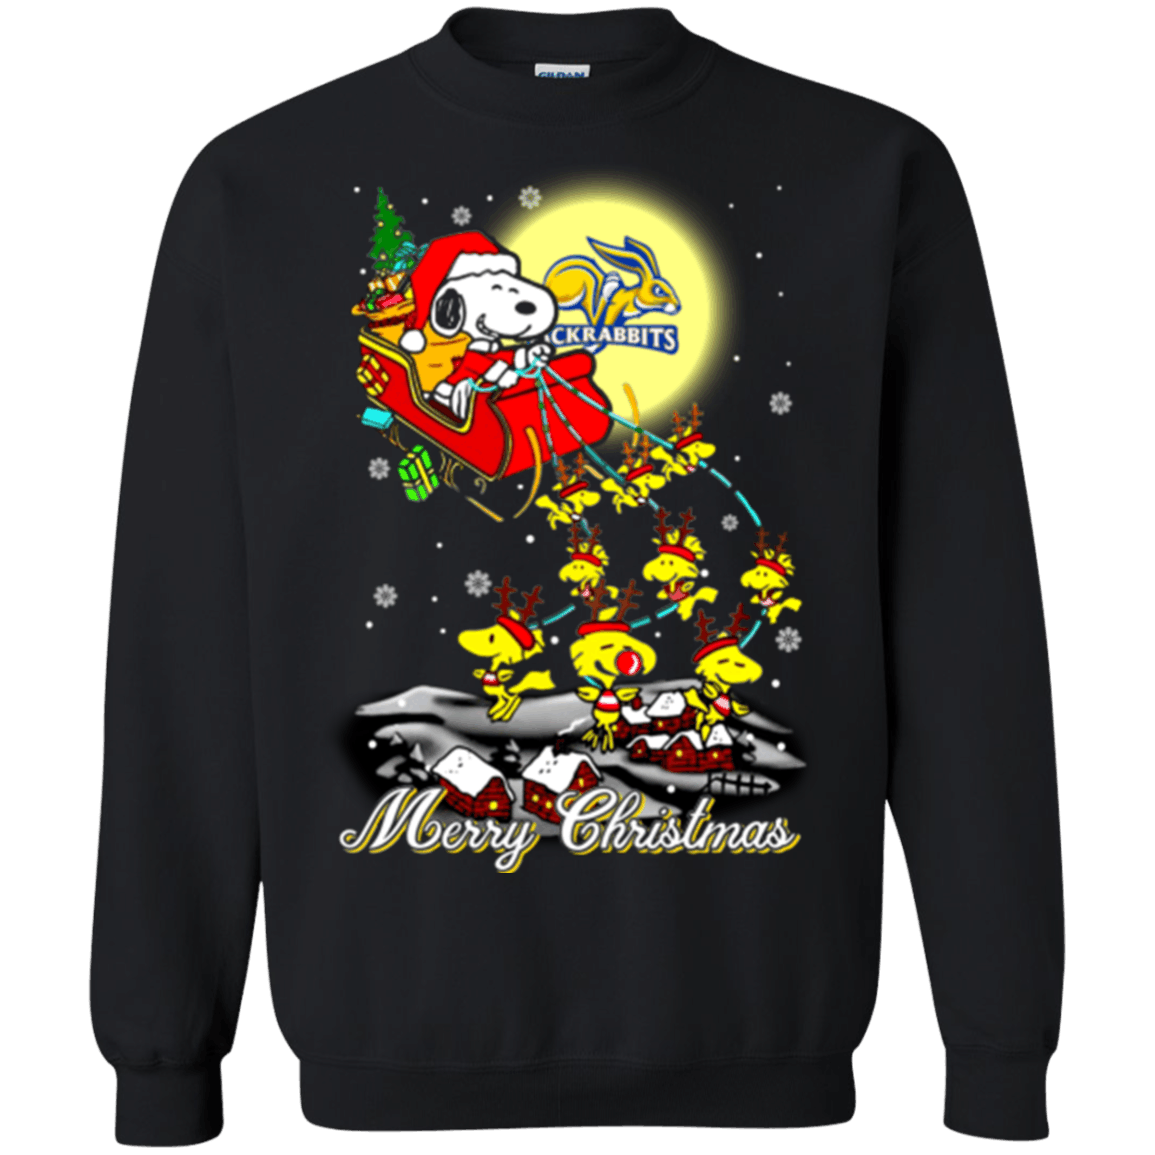 Ultimate South Dakota State Jackrabbits Ugly Christmas Sweaters Santa Claus With Sleigh And Snoopy Sweatshirts